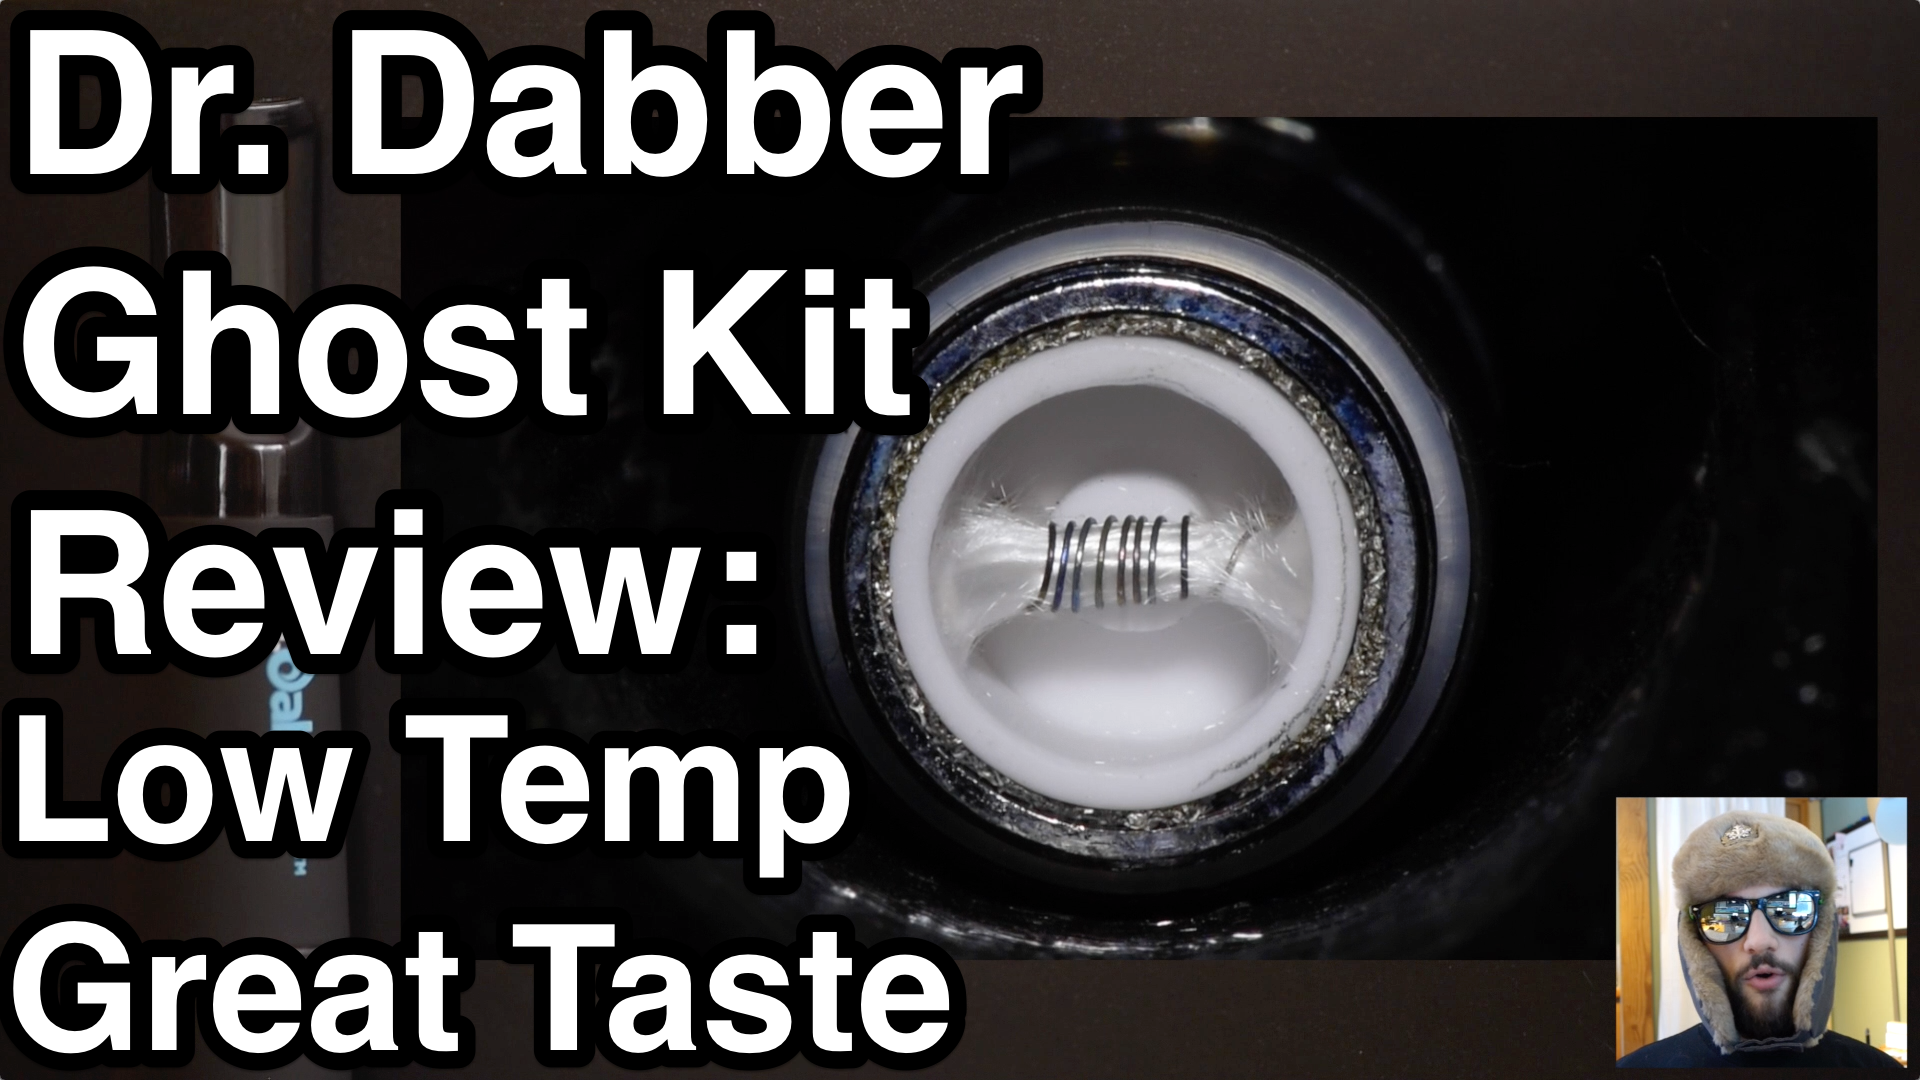 Dr. Dabber Ghost Kit Review